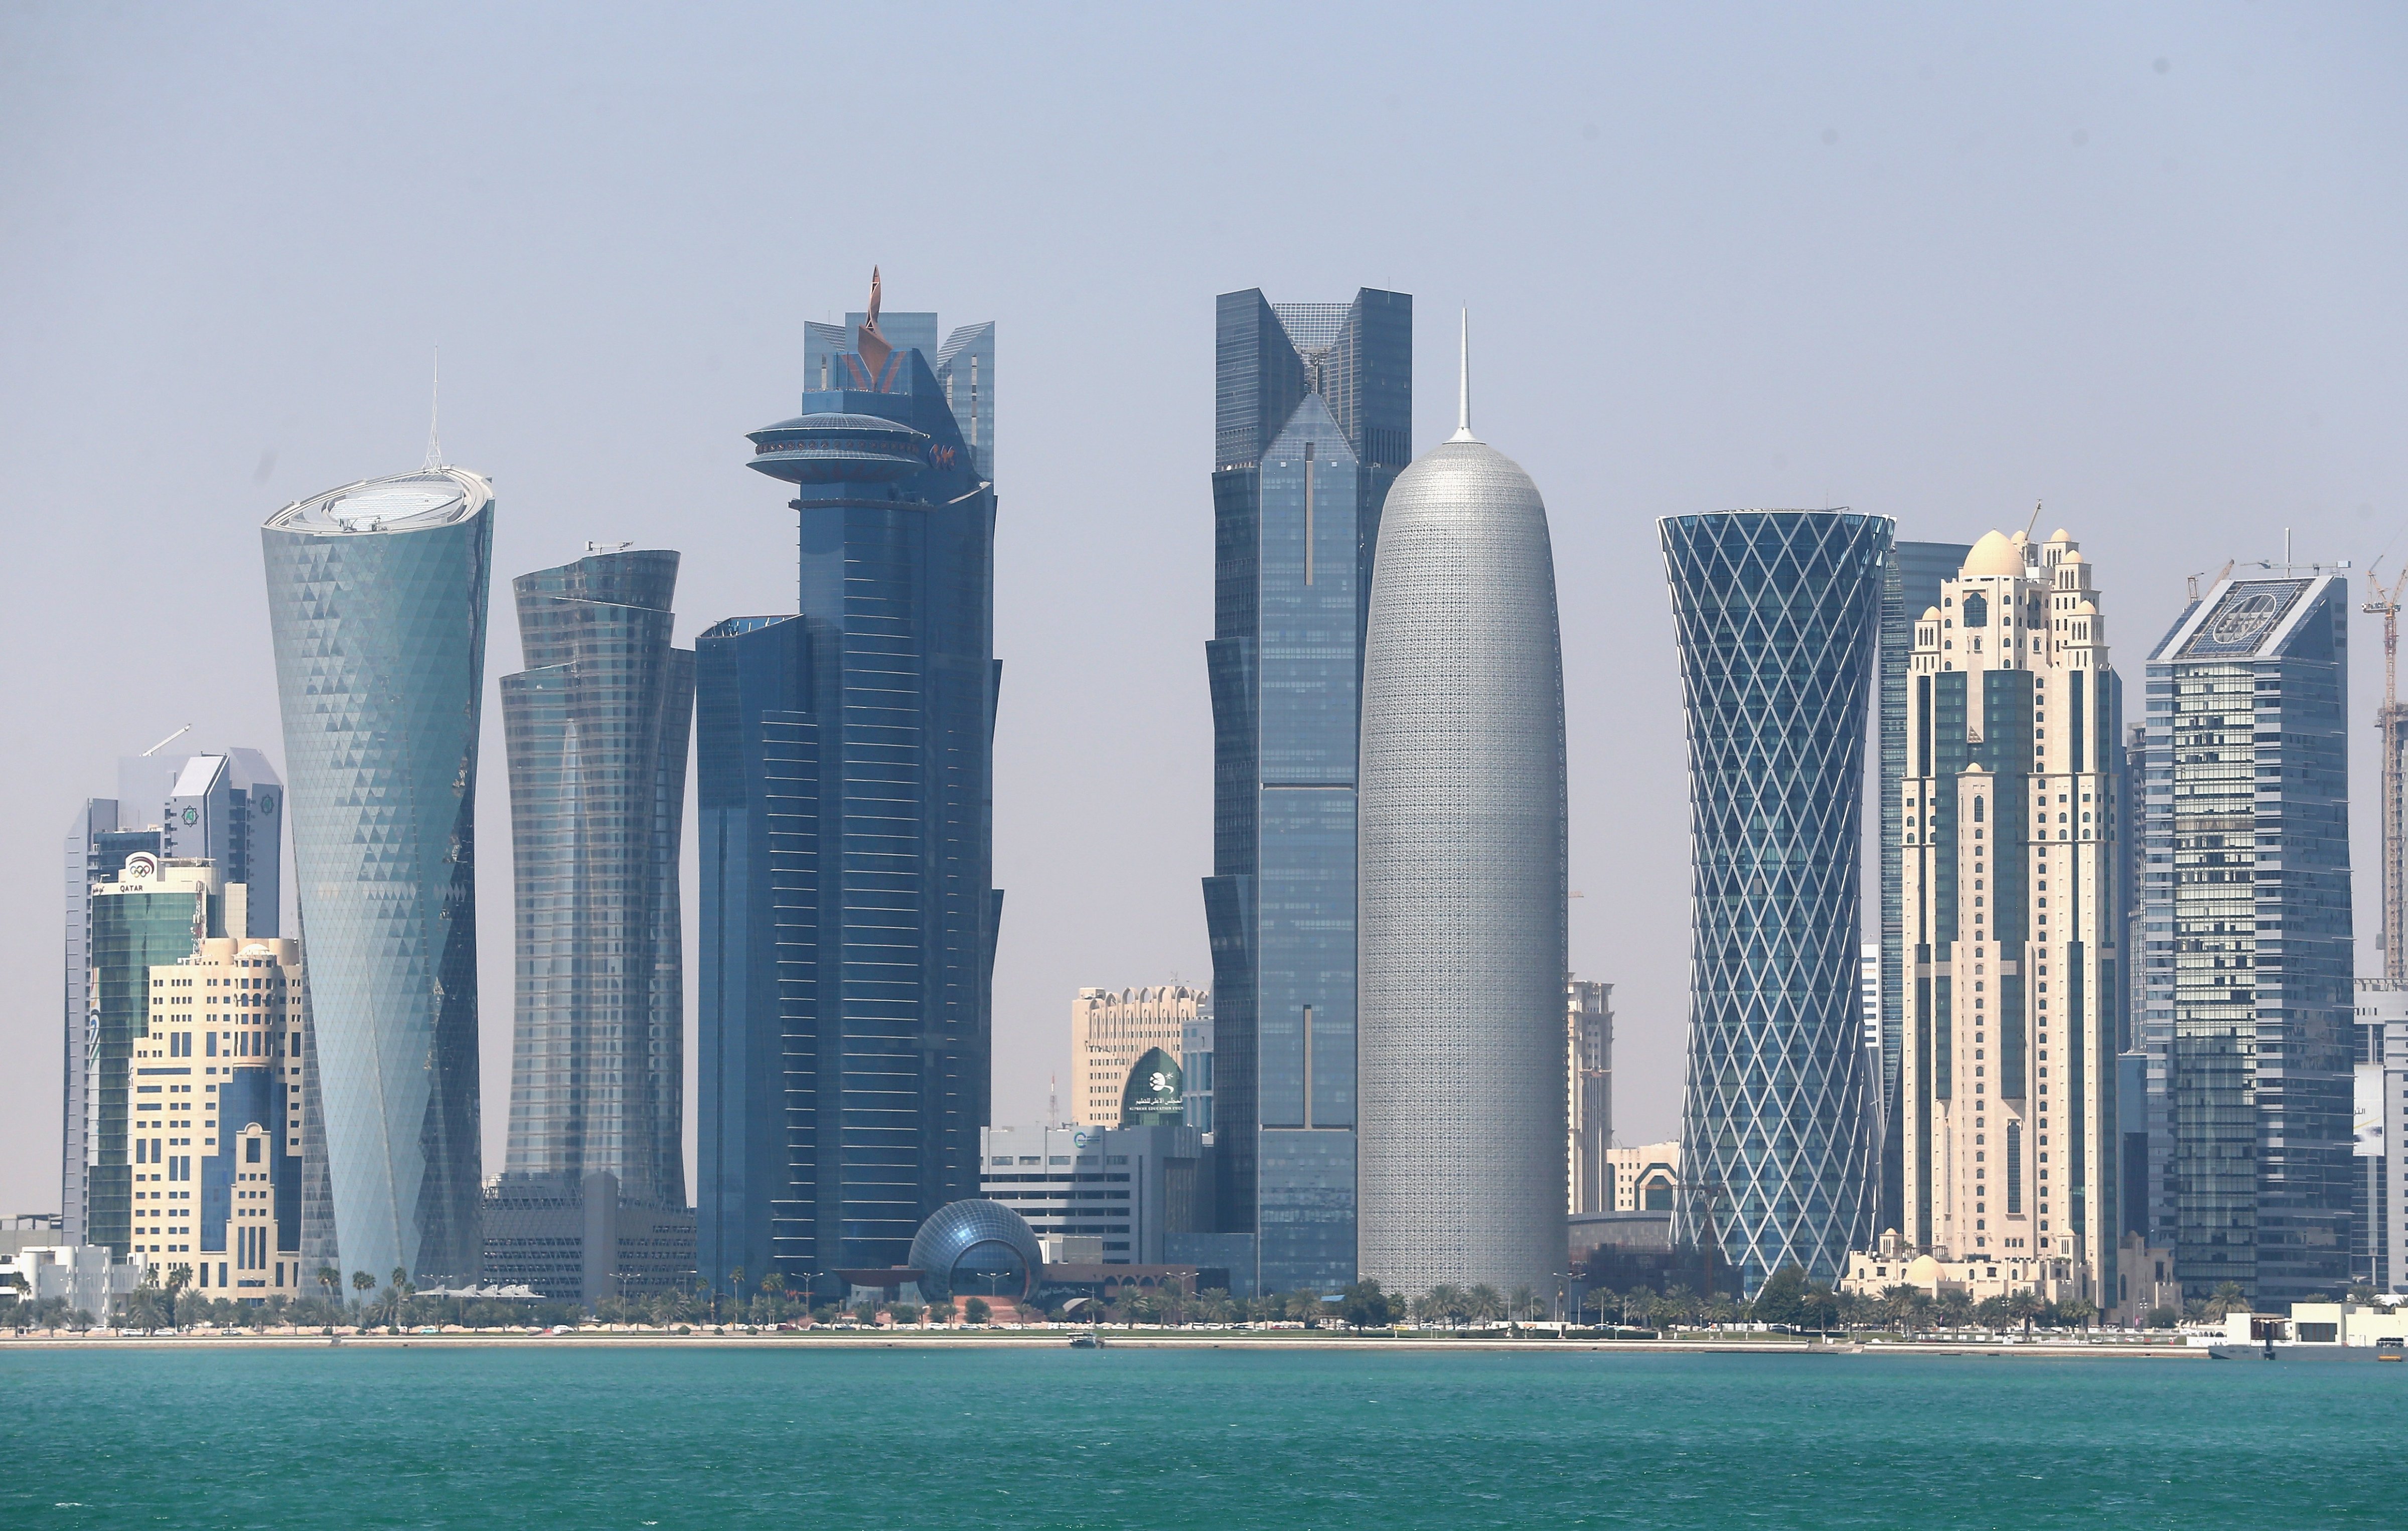 A general view of the skyline in Doha, Qatar, on Feb. 20, 2014 (Chris Jackson—Getty Images)